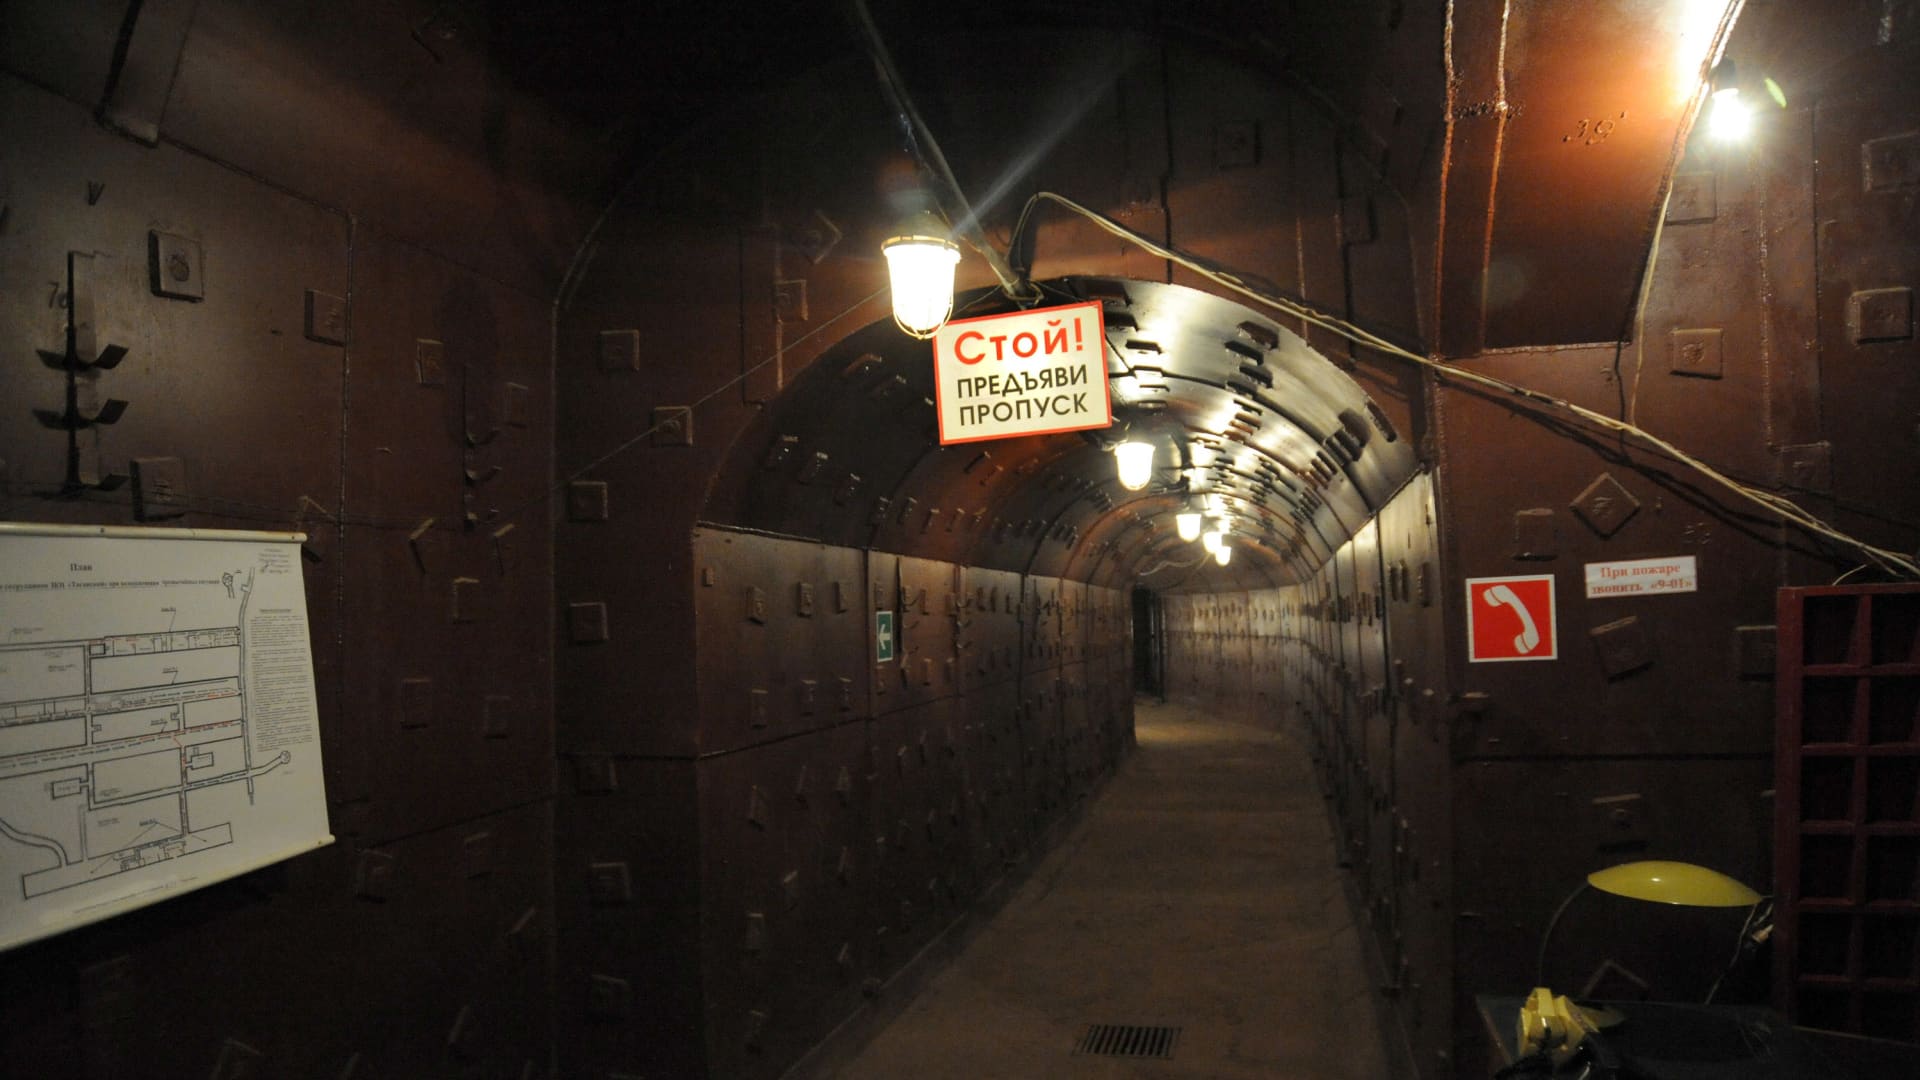 A Cold War-era bunker in Moscow that was once a heavily restricted military site.